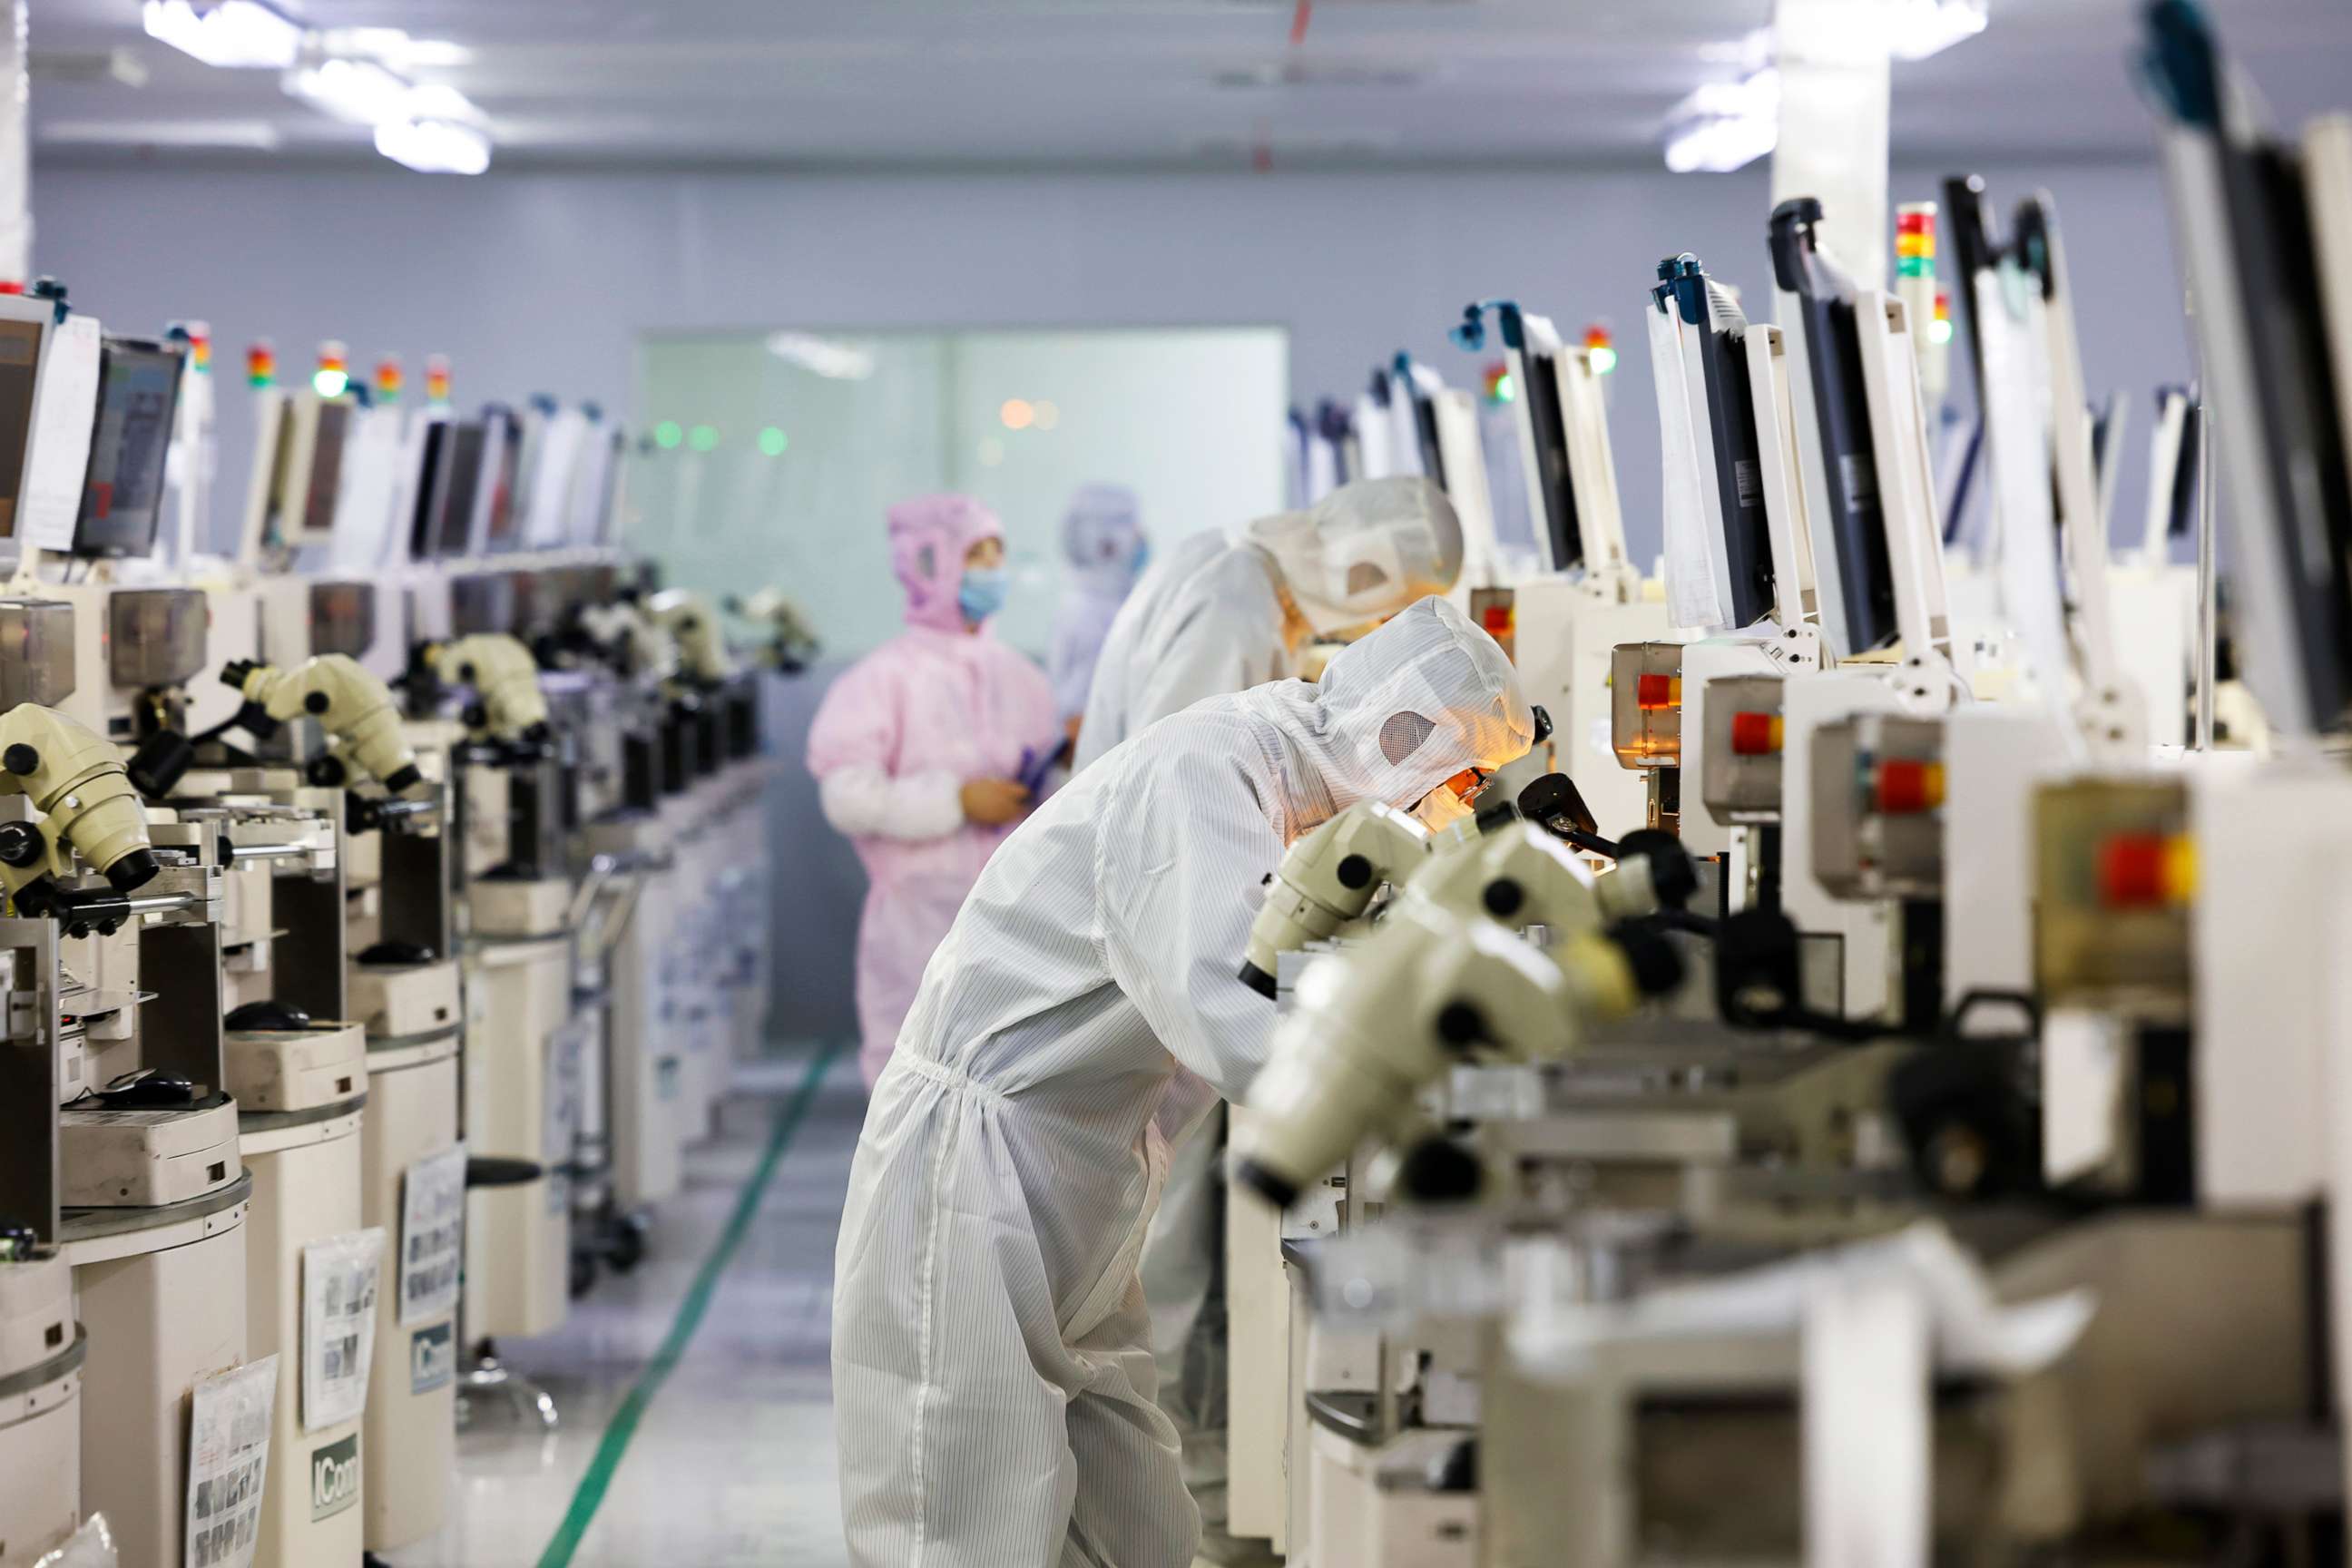 PHOTO: Employees work at a chip manufacturing company on April 19, 2022 in Suqian, Jiangsu Province of China.